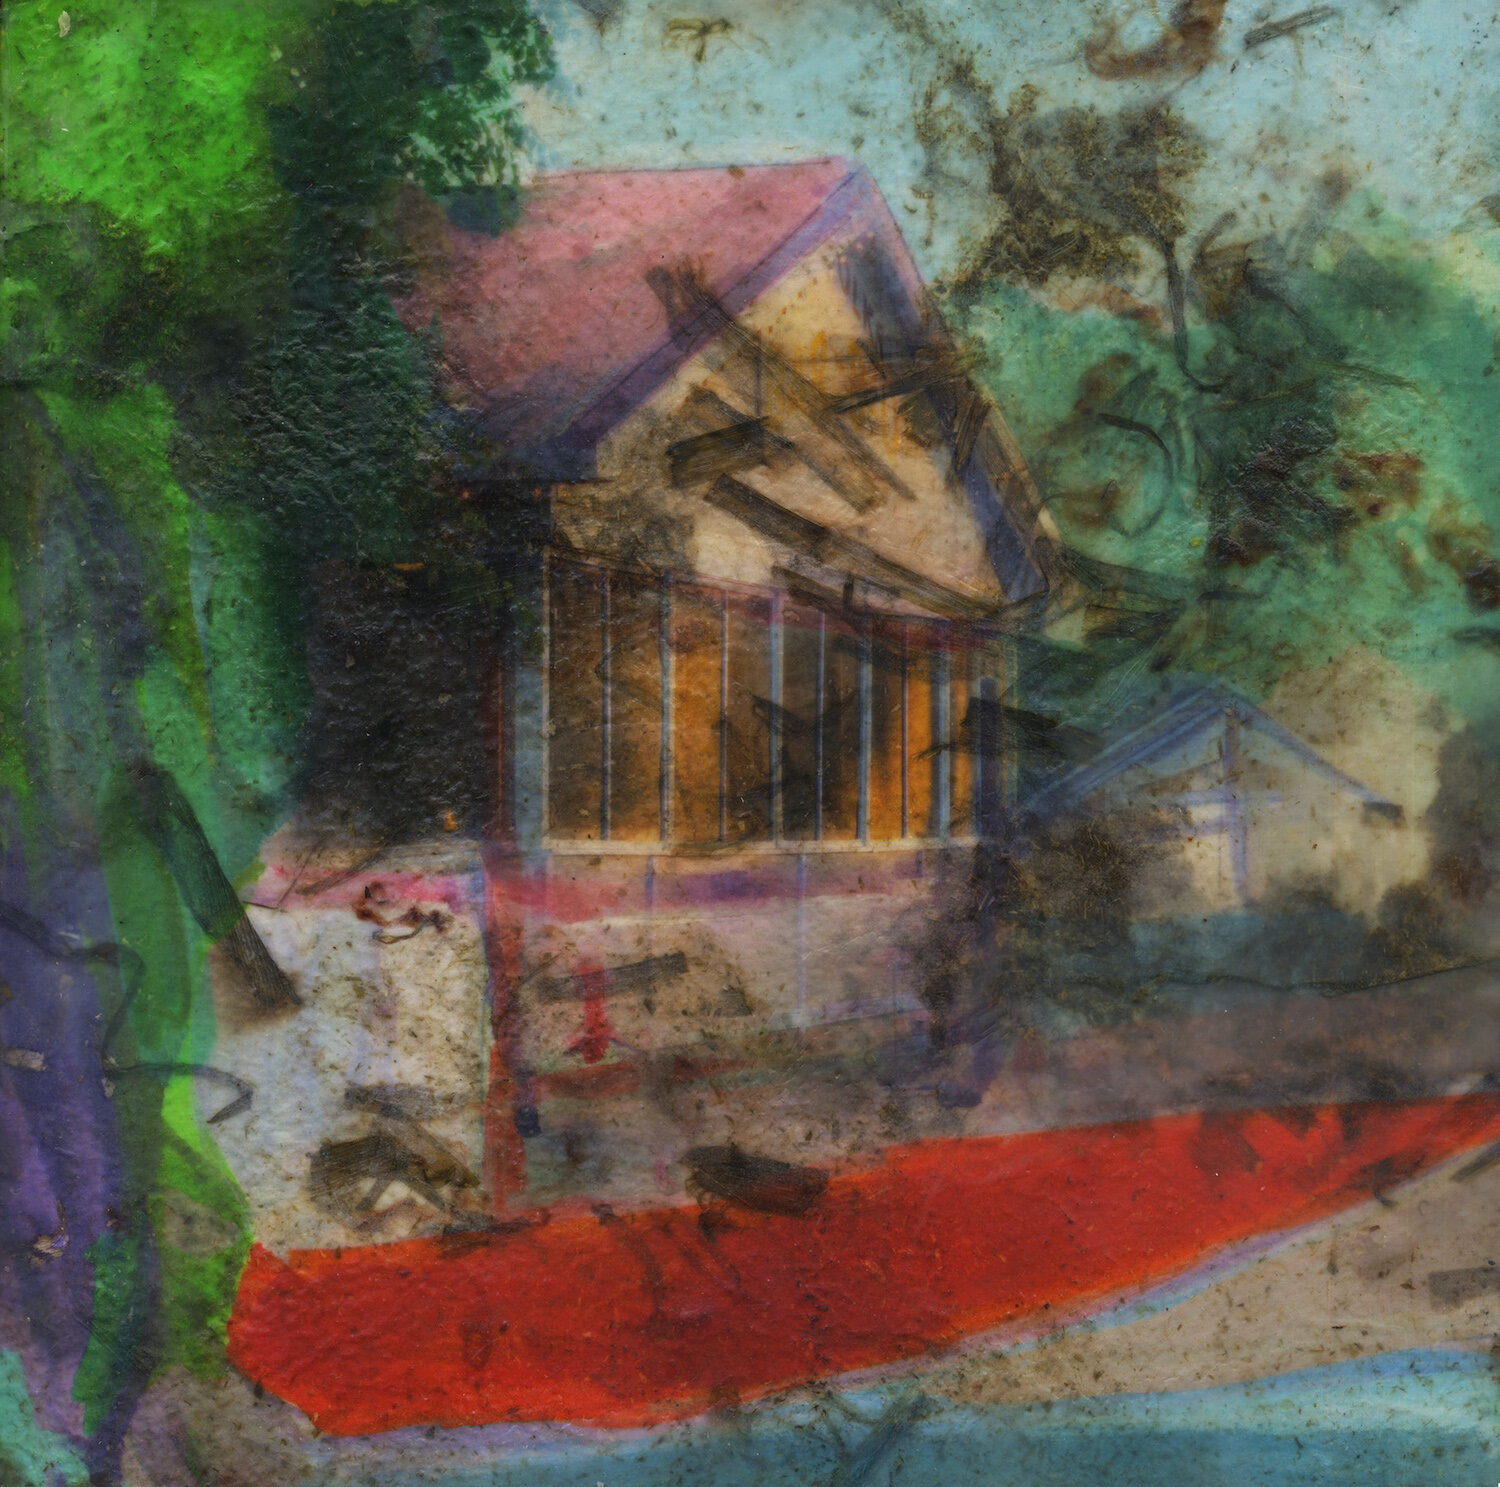    Elm (house)  , pigment print on handmade cotton paper, oil and encaustic on board, 12” x 12” 